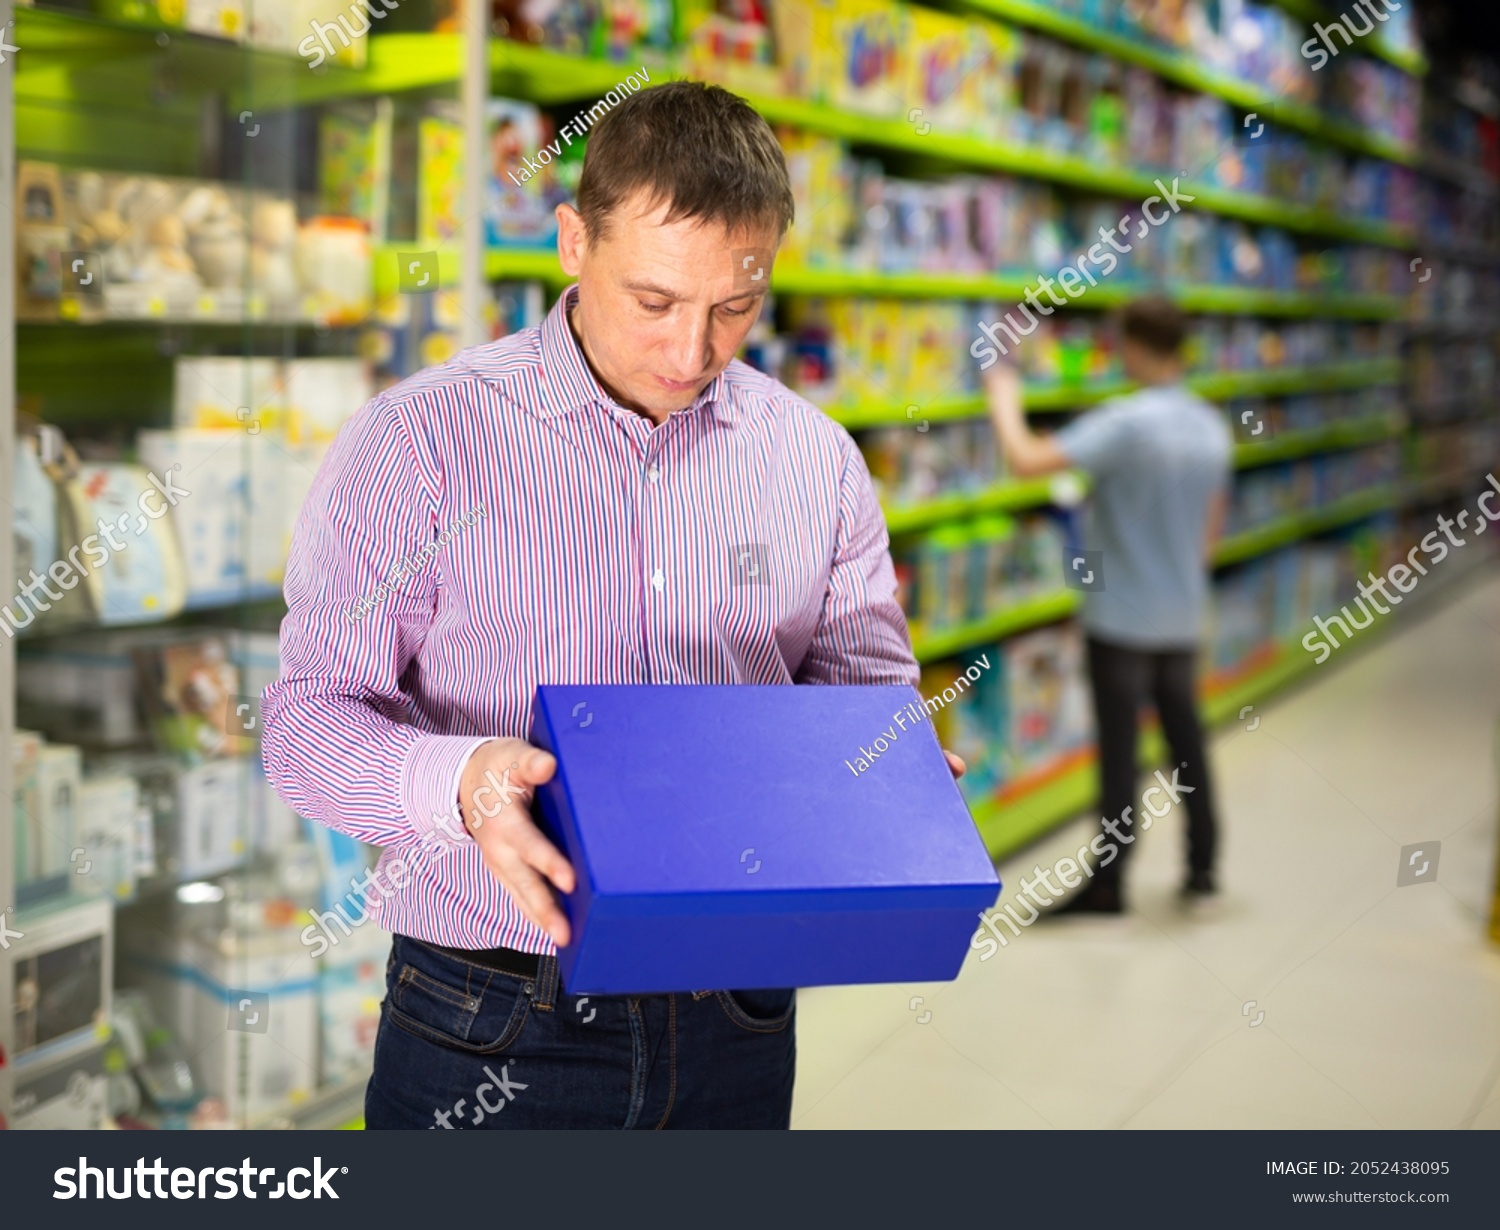 Caring father visiting toy store in search of new playthings for his child, looking narrowly at carton box #2052438095